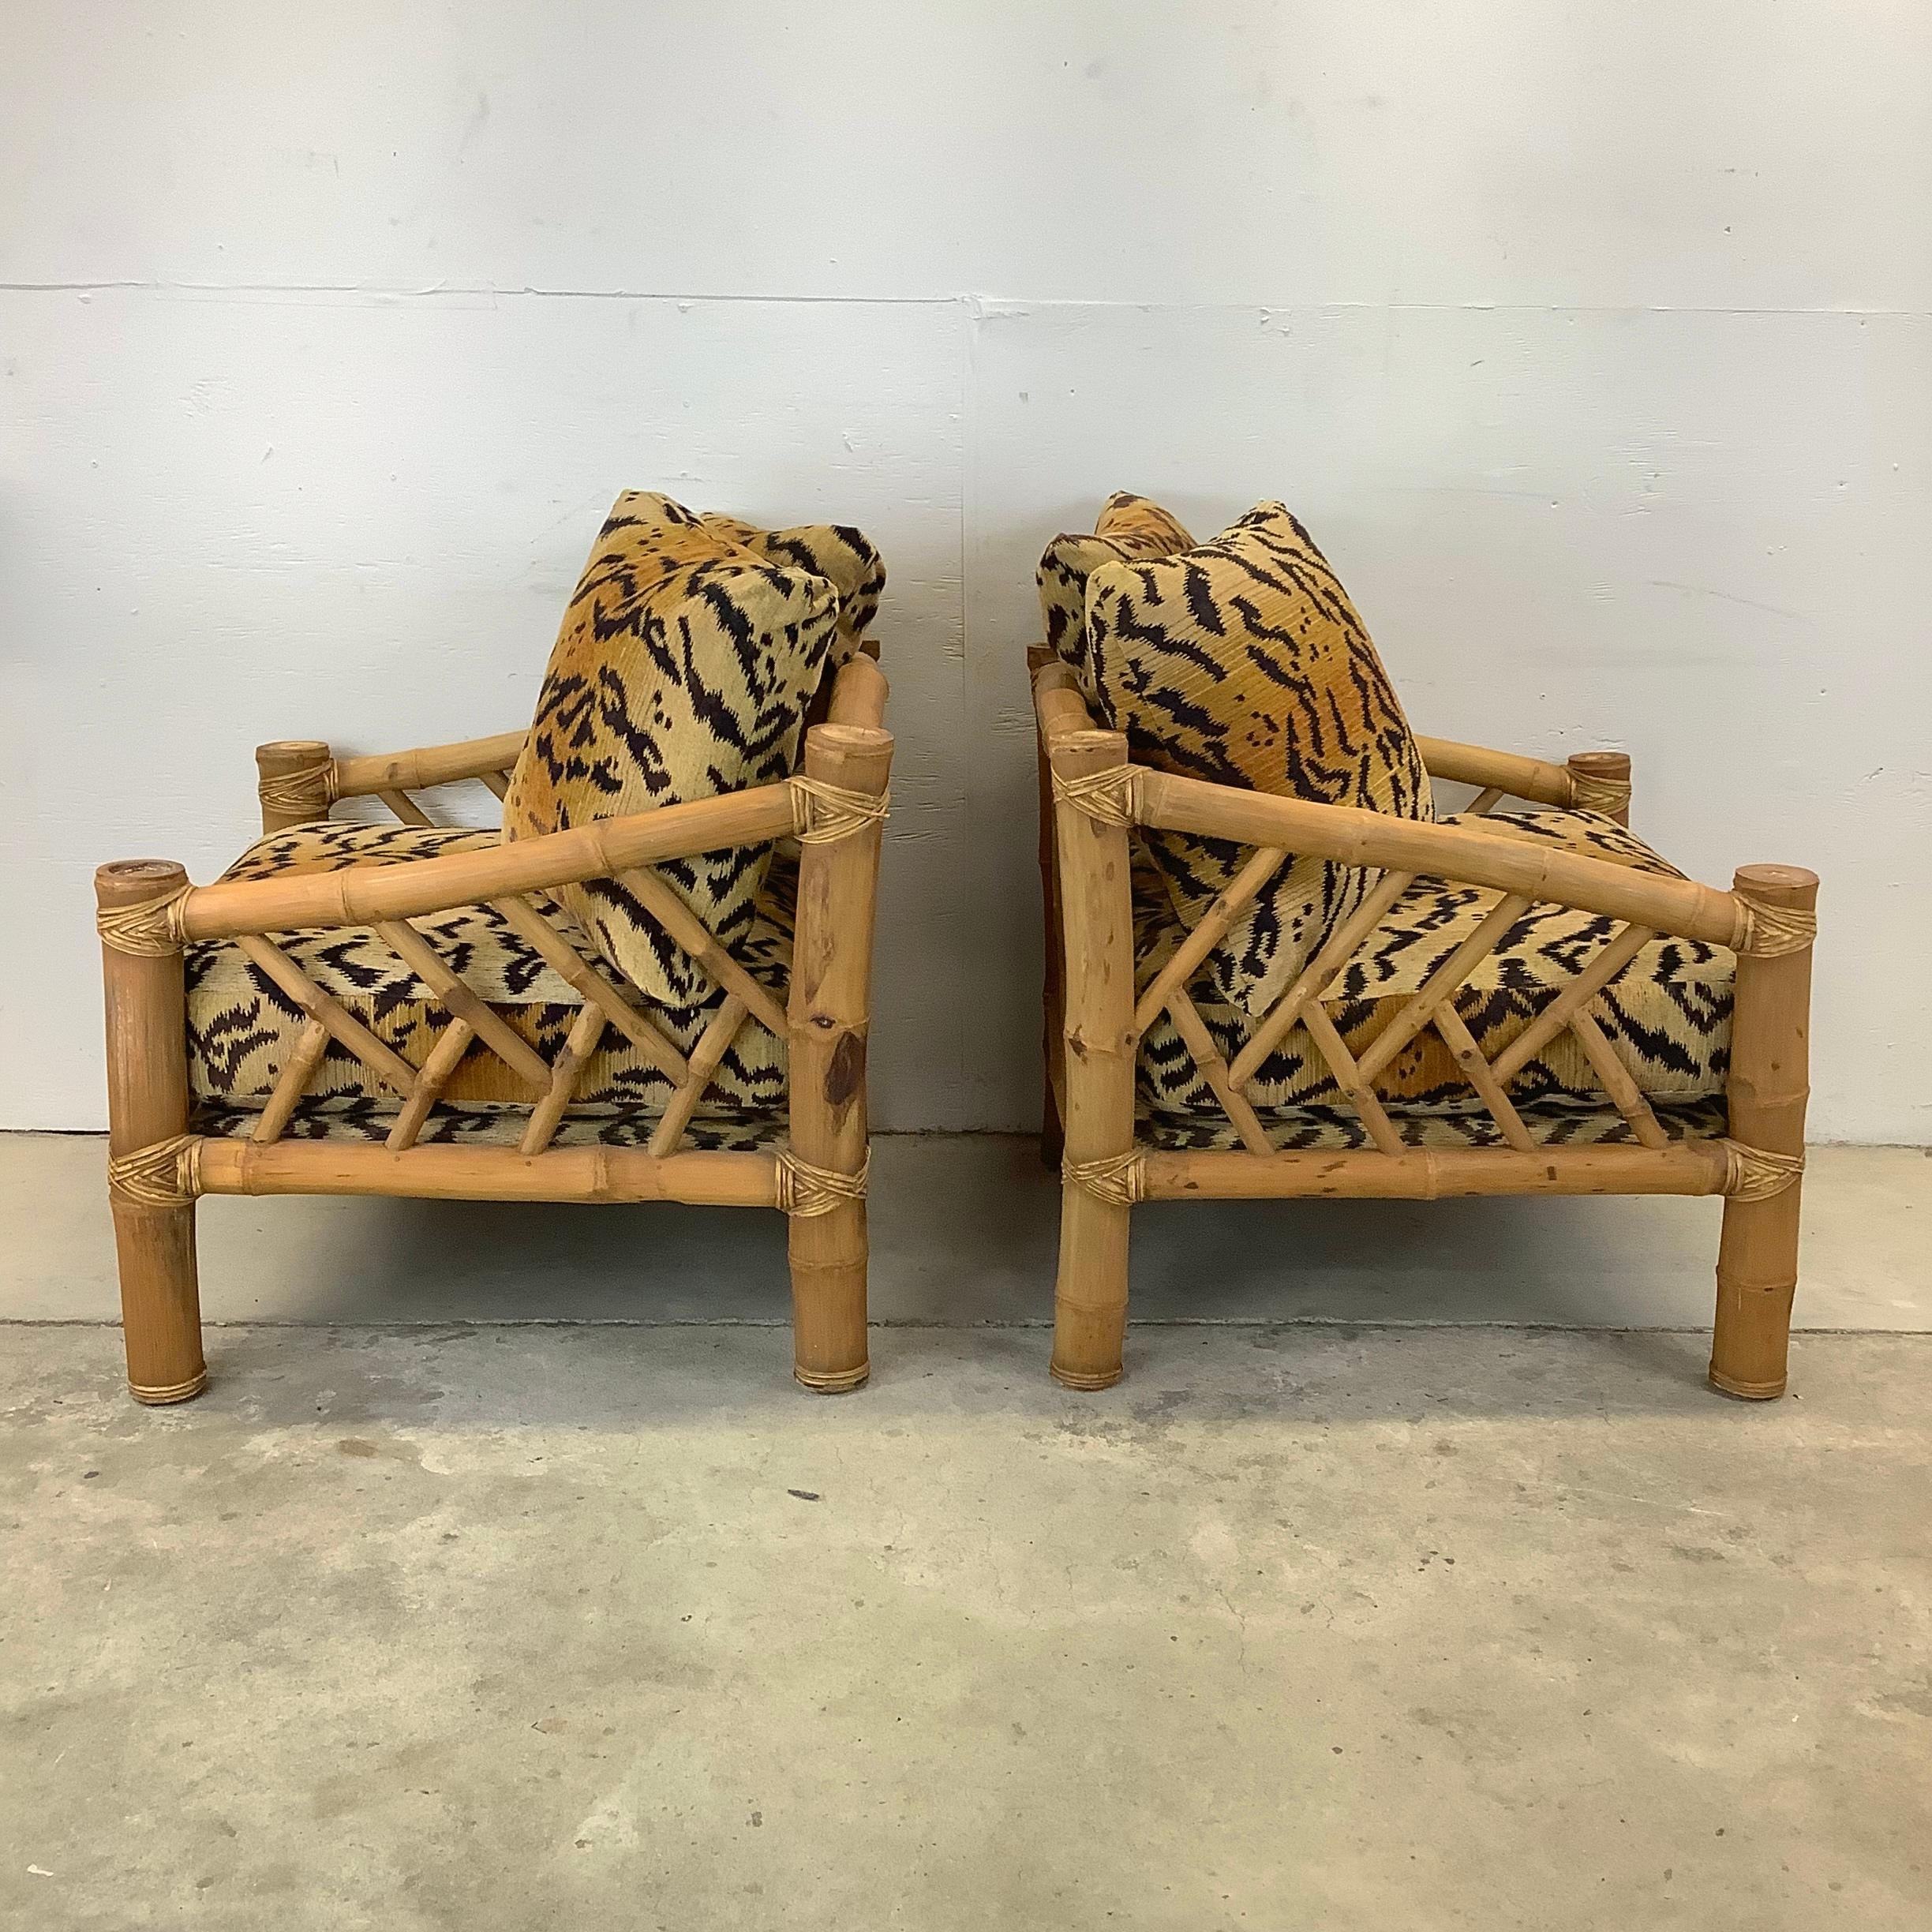 Pair Vintage Bamboo Armchairs & Ottoman in Tiger Print For Sale 1